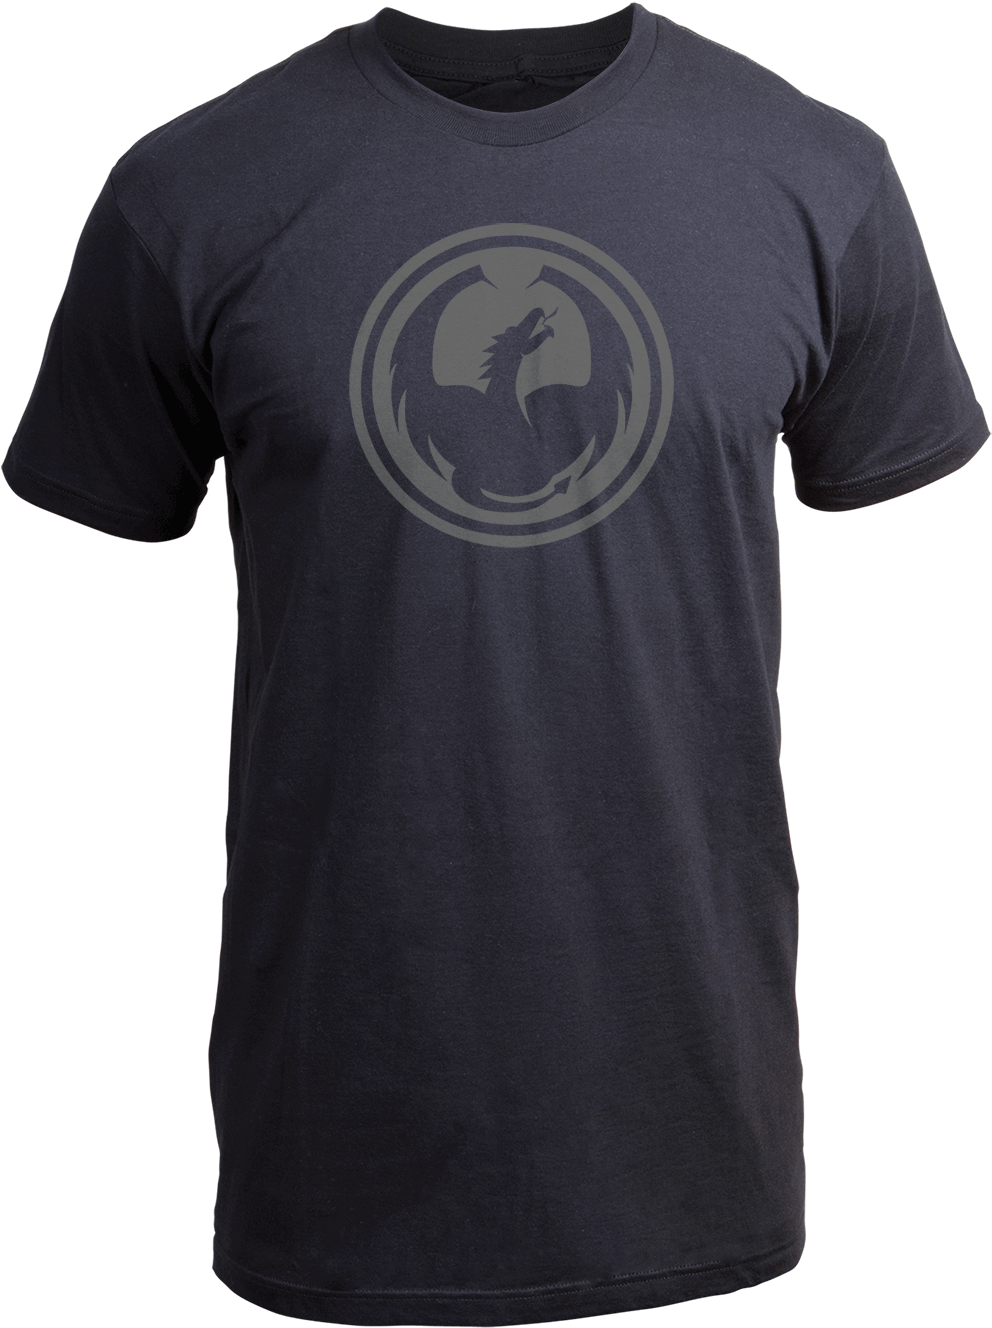 Navy Blue Horse Graphic Tee Shirt PNG